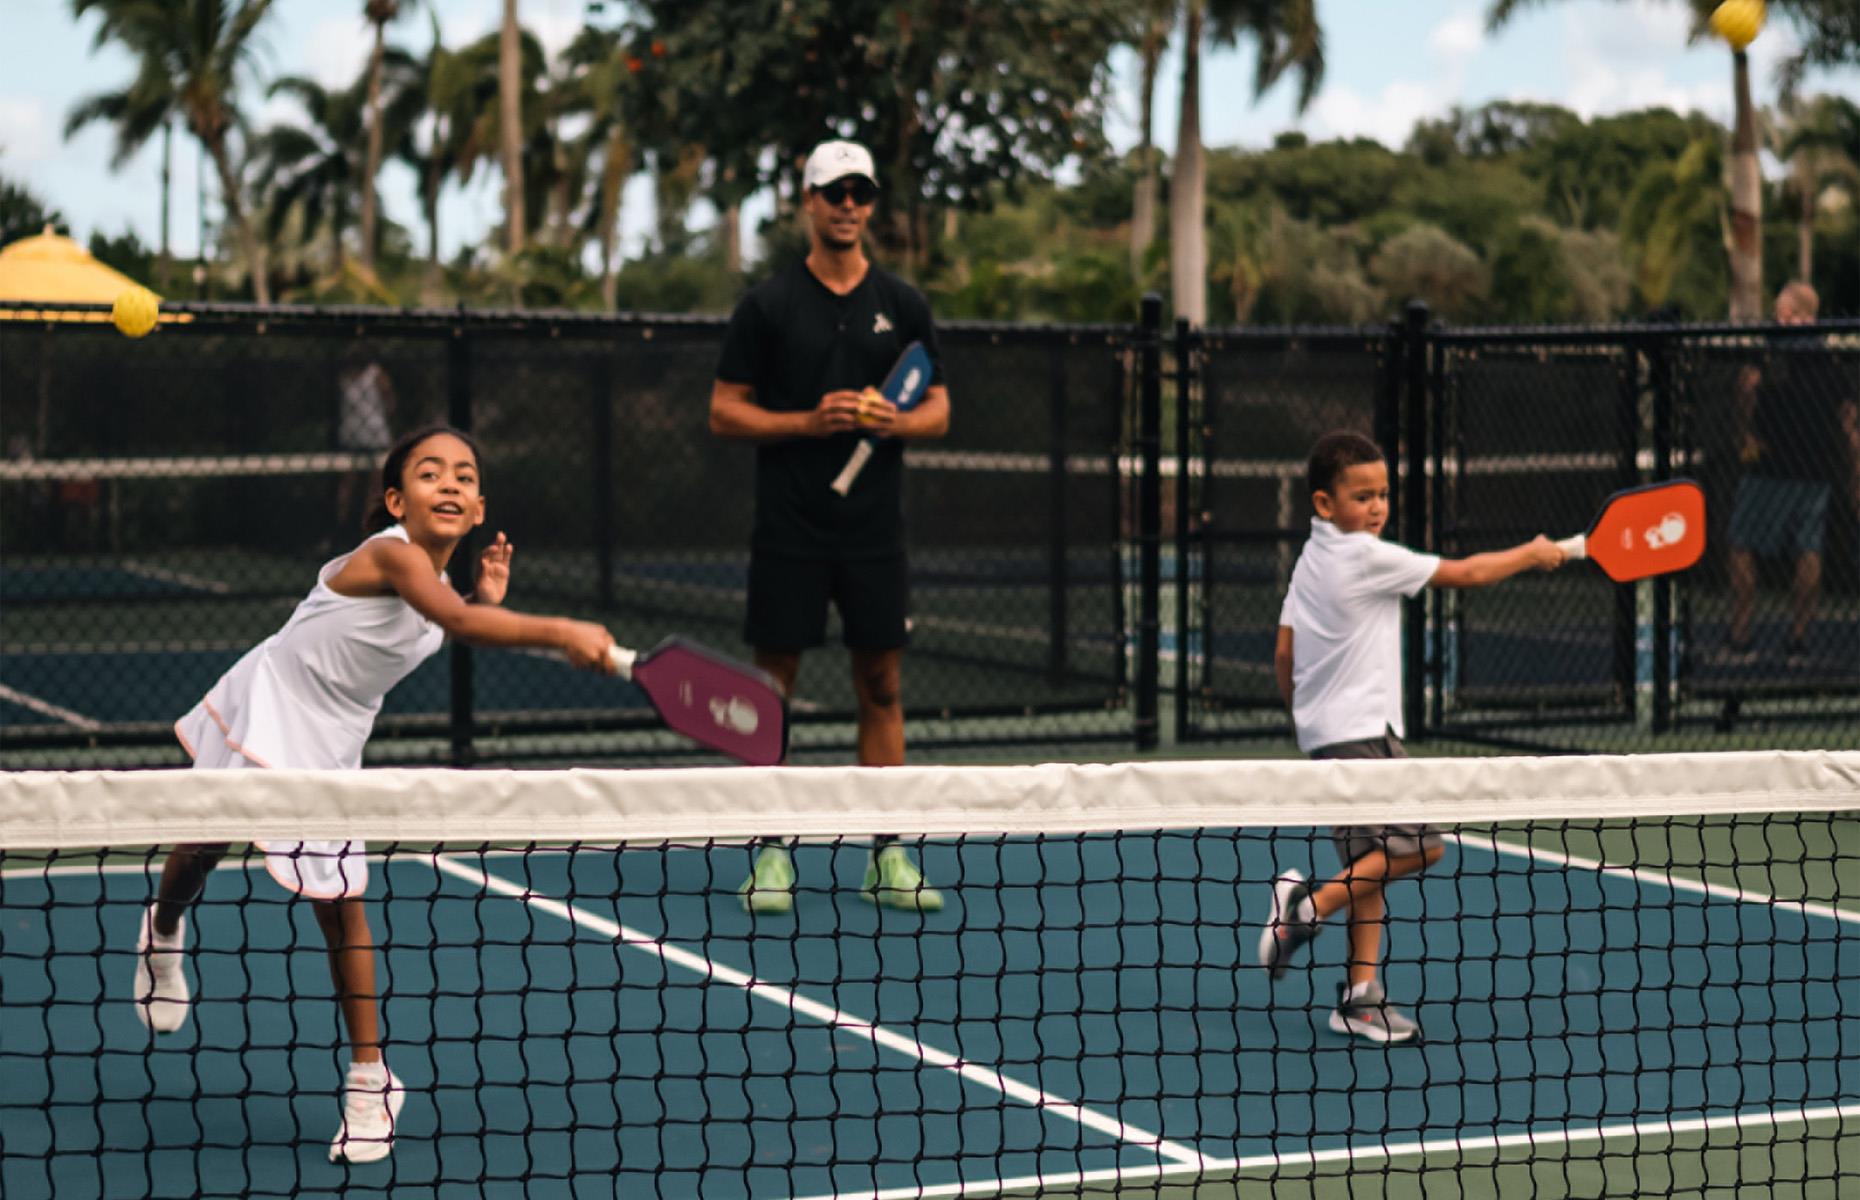 <p>If you’re lucky enough to be staying at the five-star <a href="https://www.fourseasons.com/nevis">Four Seasons</a> in Nevis’ northwestern corner, there’s no better way to start the day than by hitting the sports facilities for a game of pickleball: an addictive mash-up of ping-pong, tennis and badminton played with paddles and a light plastic ball. You can either play one-on-one or in pairs, and the aim of the game is to hit the ball over the net and prevent your opponent from returning your shot. The scoring system is a little complicated, so you might want to book a private lesson with one of the resort’s pros to get the hang of it.</p>